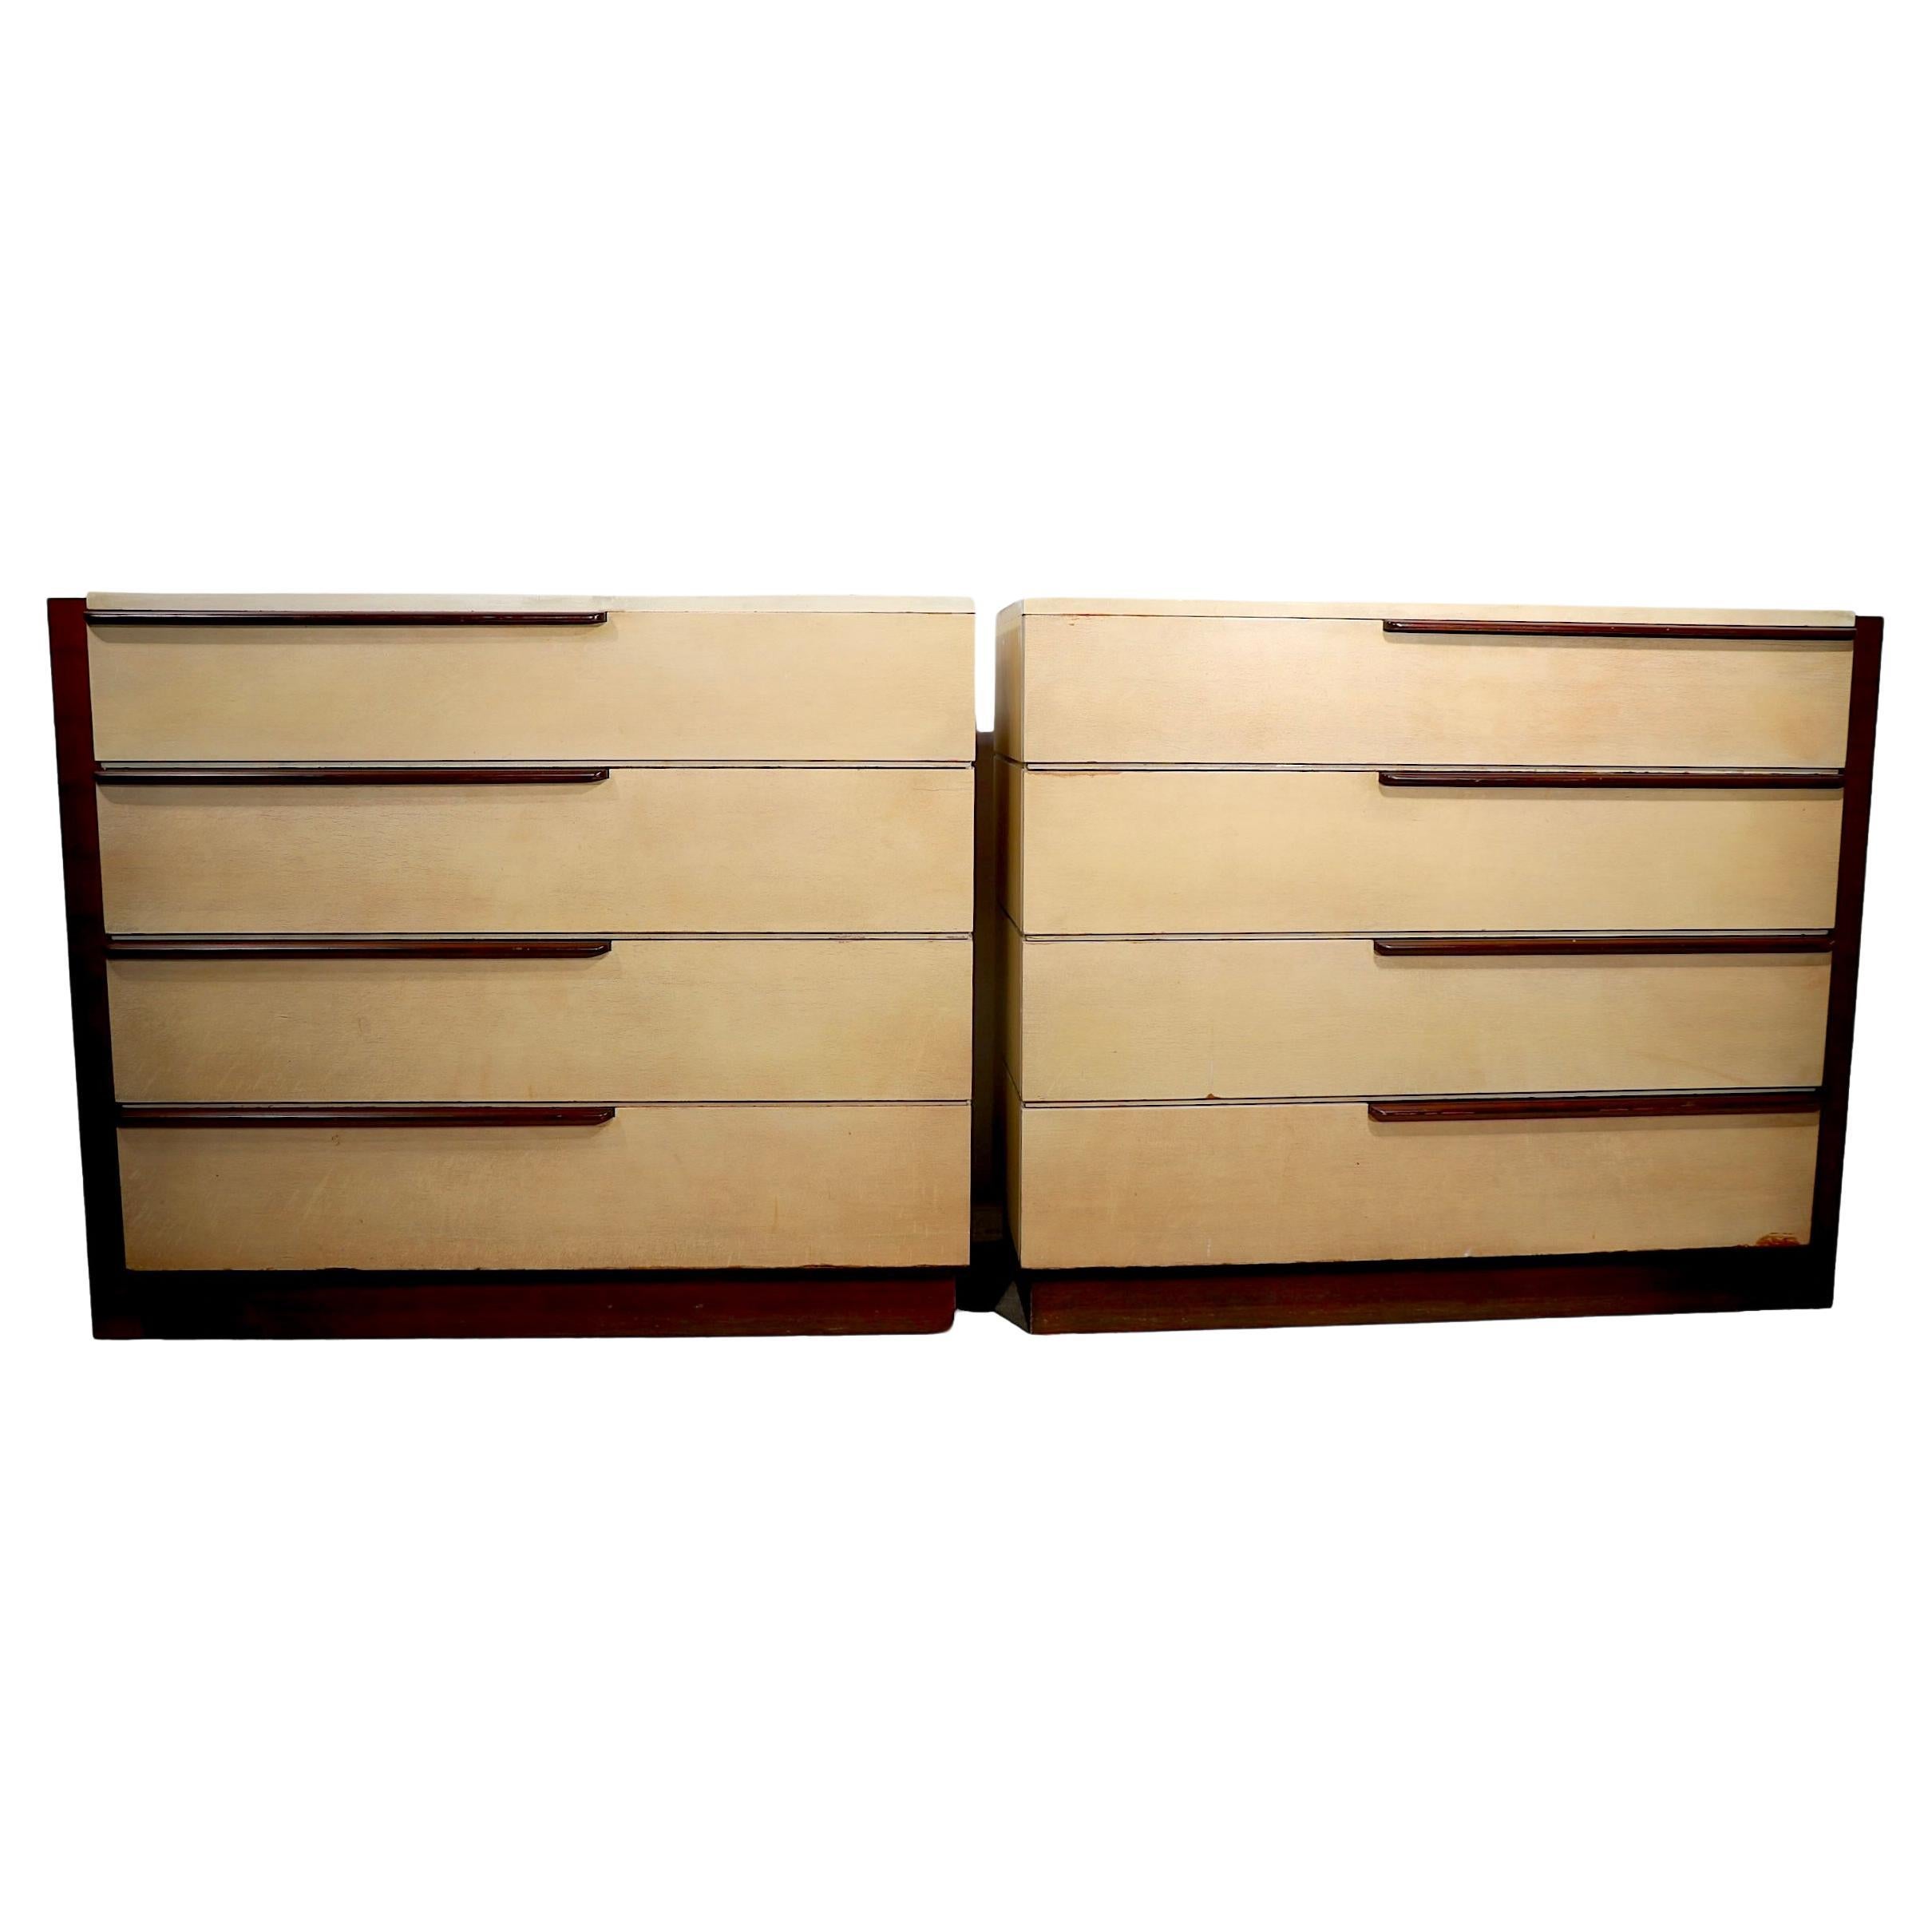 Chic pair of streamline Art Moderne dressers designed by Gilbert Rohde, for Herman Miller c 1936. The dressers feature opposing right and left cases, each with pale yellow drawer fronts and tops, with contrasting walnut framing, and drawer pulls. We